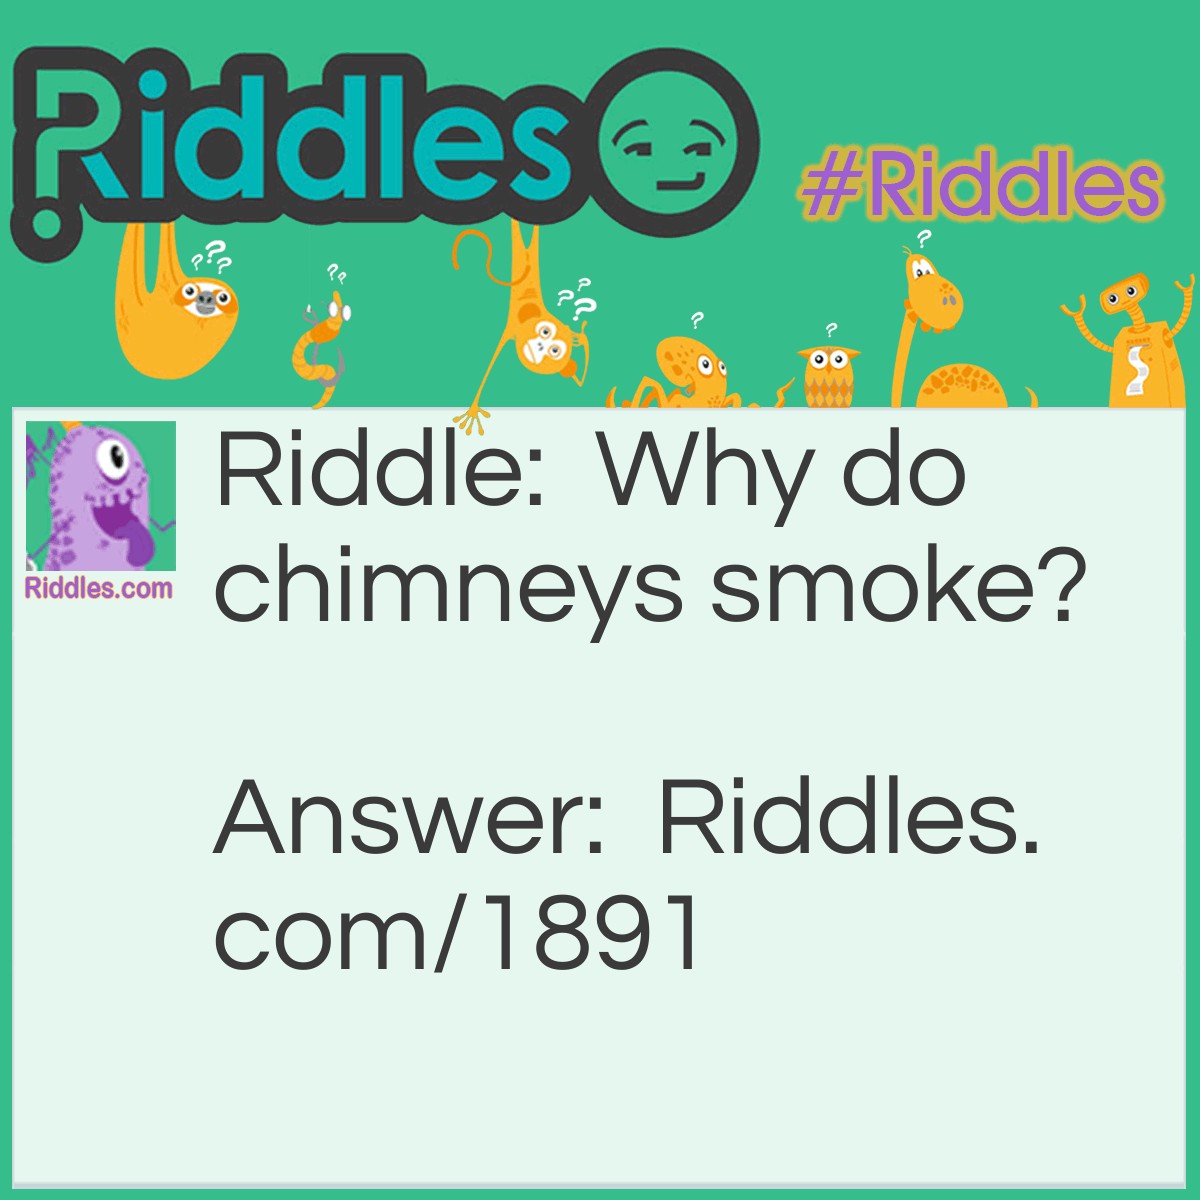 Riddle: Why do chimneys smoke? Answer: Because they can't chew.